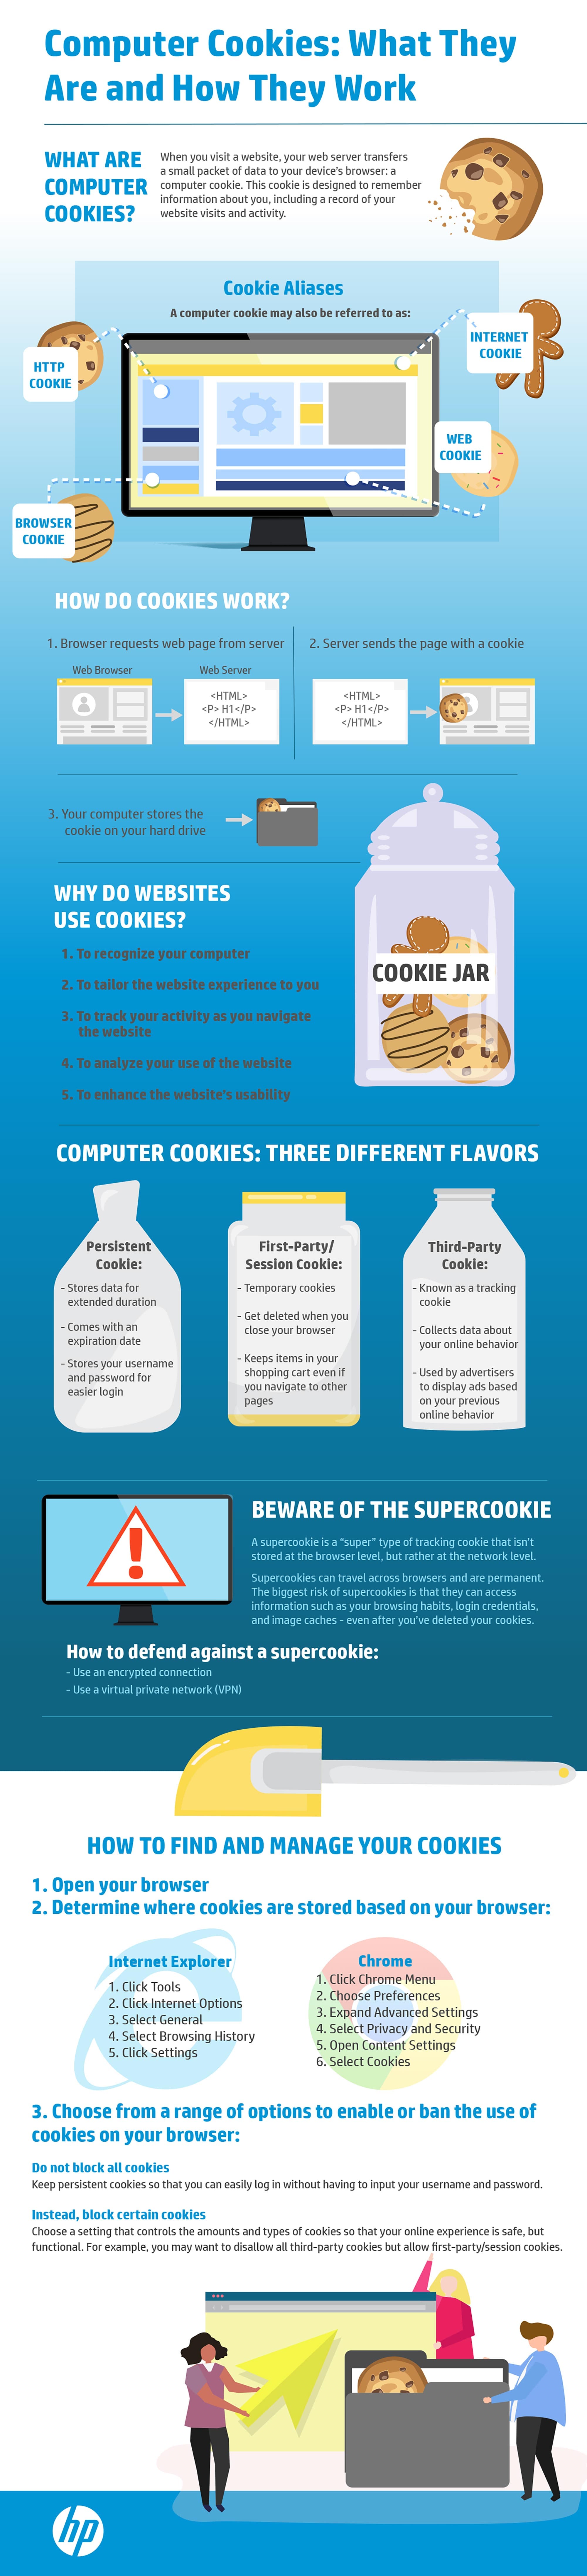 What are Computer Cookies Infographic